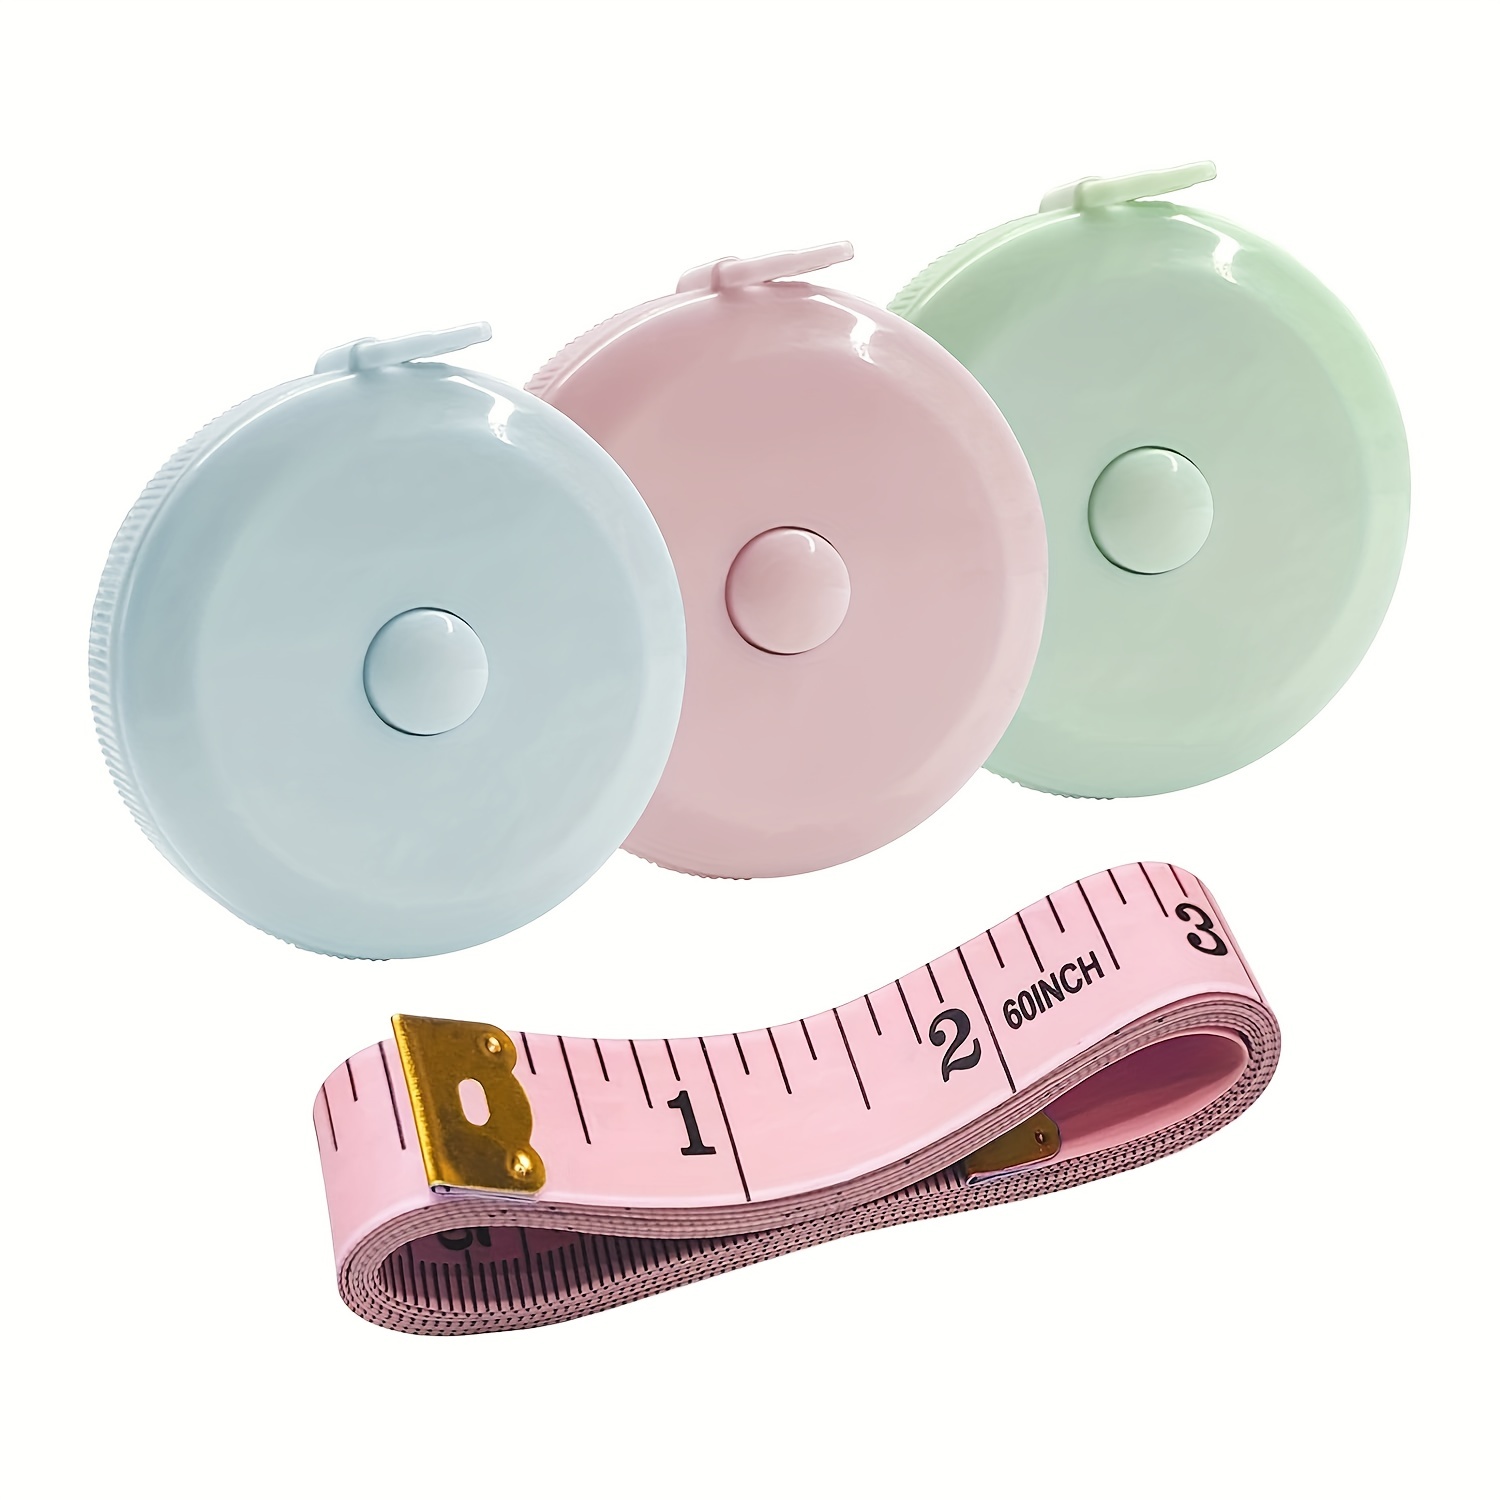 Measuring Tape Retractable, 60 Inch Soft Fabric Tape Measure for Body, Push  Button Sewing Measurement Tape for Cloth Waist 